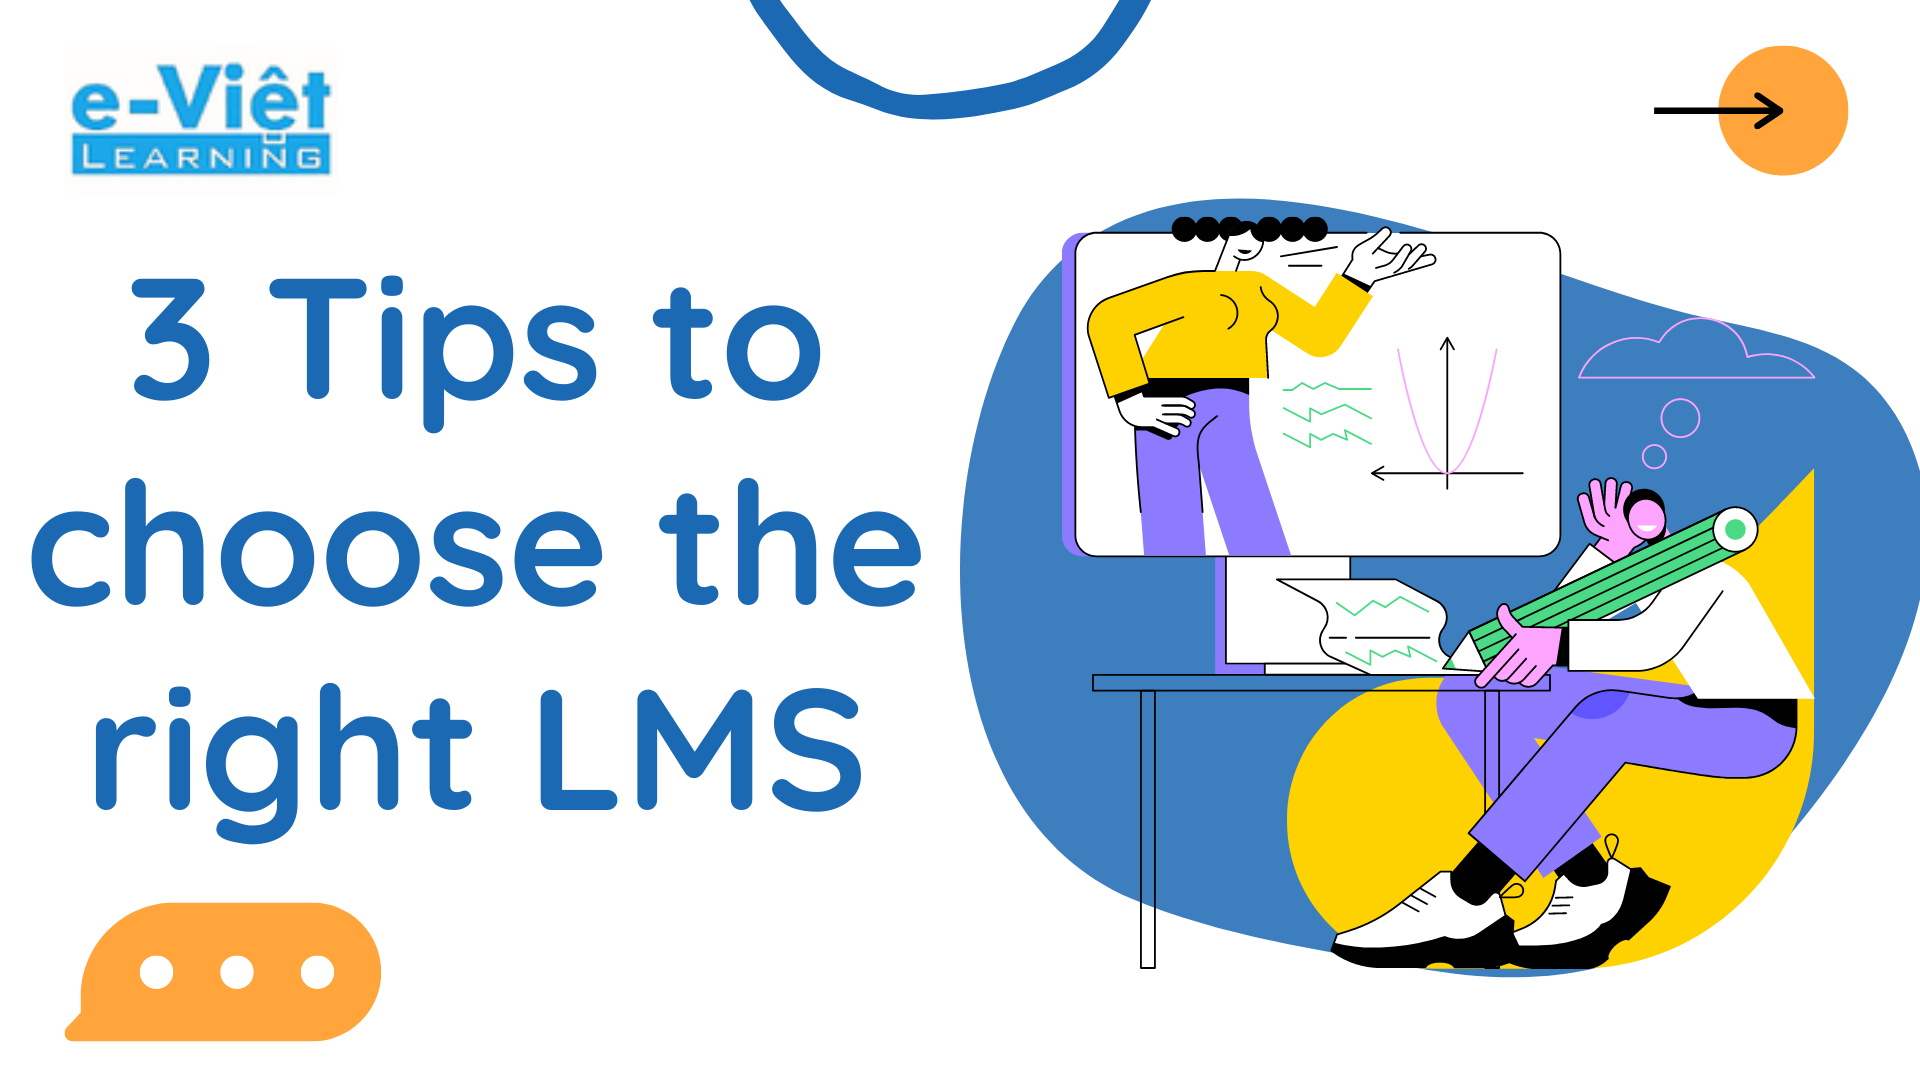 3 Tips for choosing the right LMS